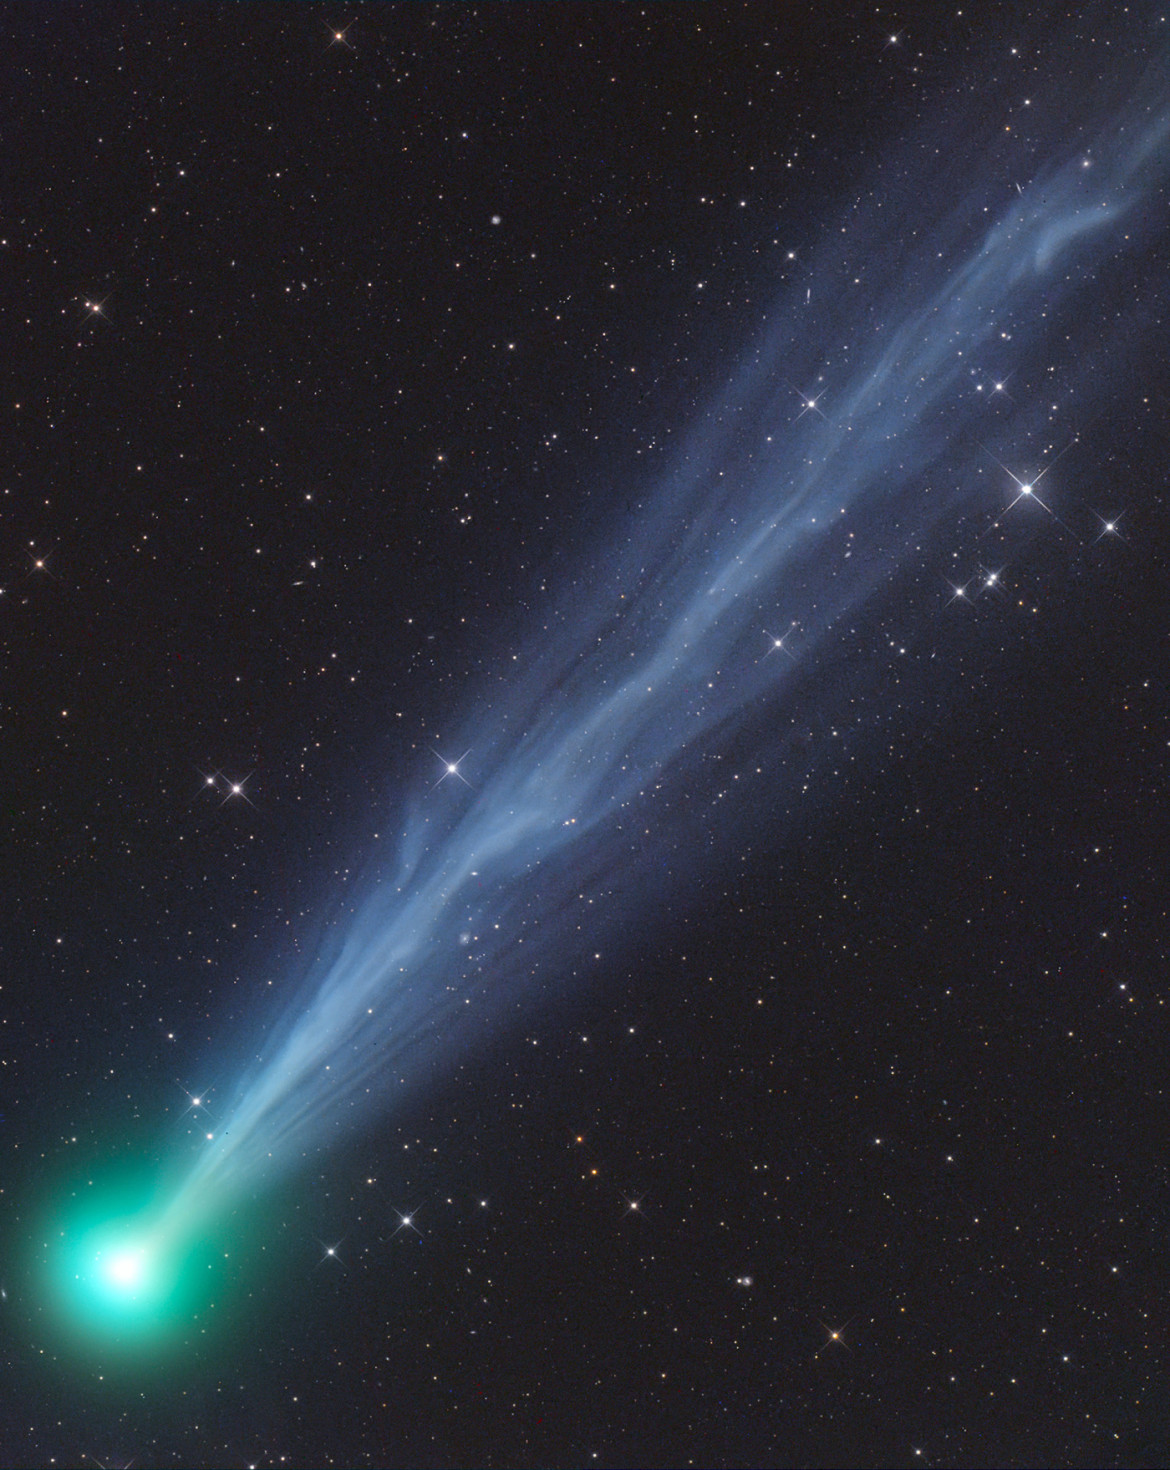 fot. Gerald Rhemann, "The Exceptionally Active Ion Tail of Comet-2020F8-SWAN" / Astronomy Photographer of the Year 2021